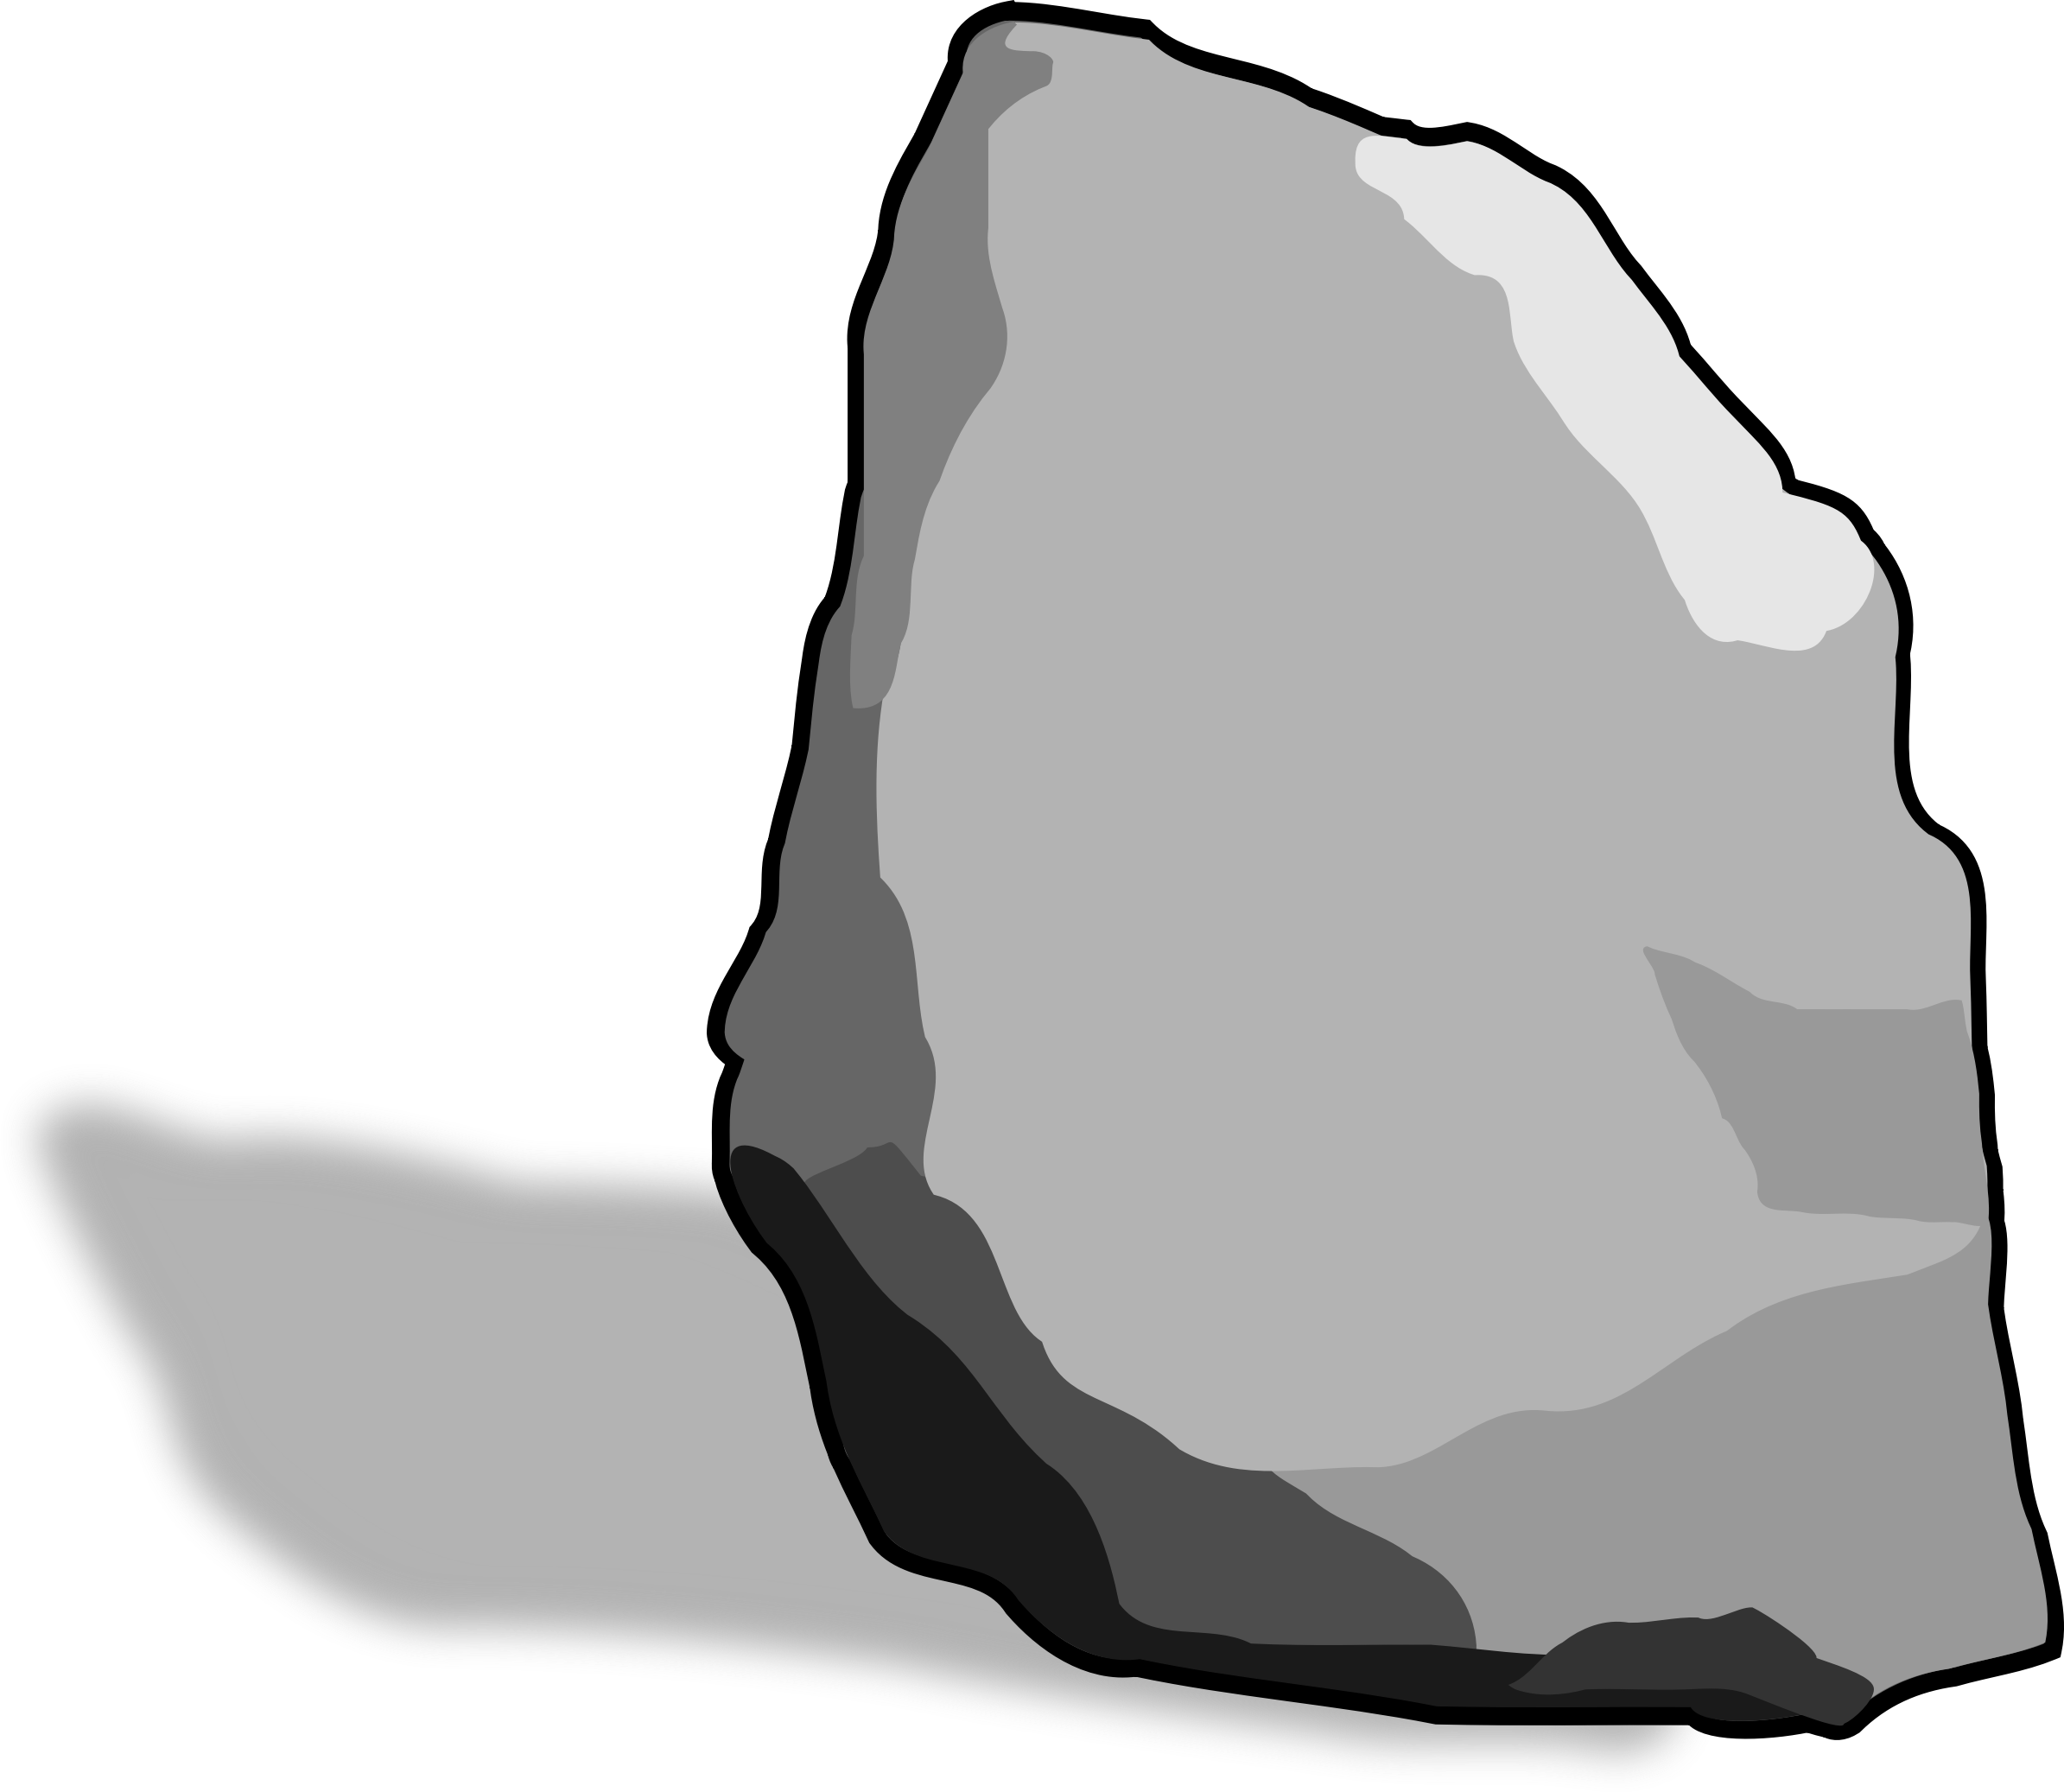 Free Solid Rock Cliparts, Download Free Solid Rock Cliparts png images